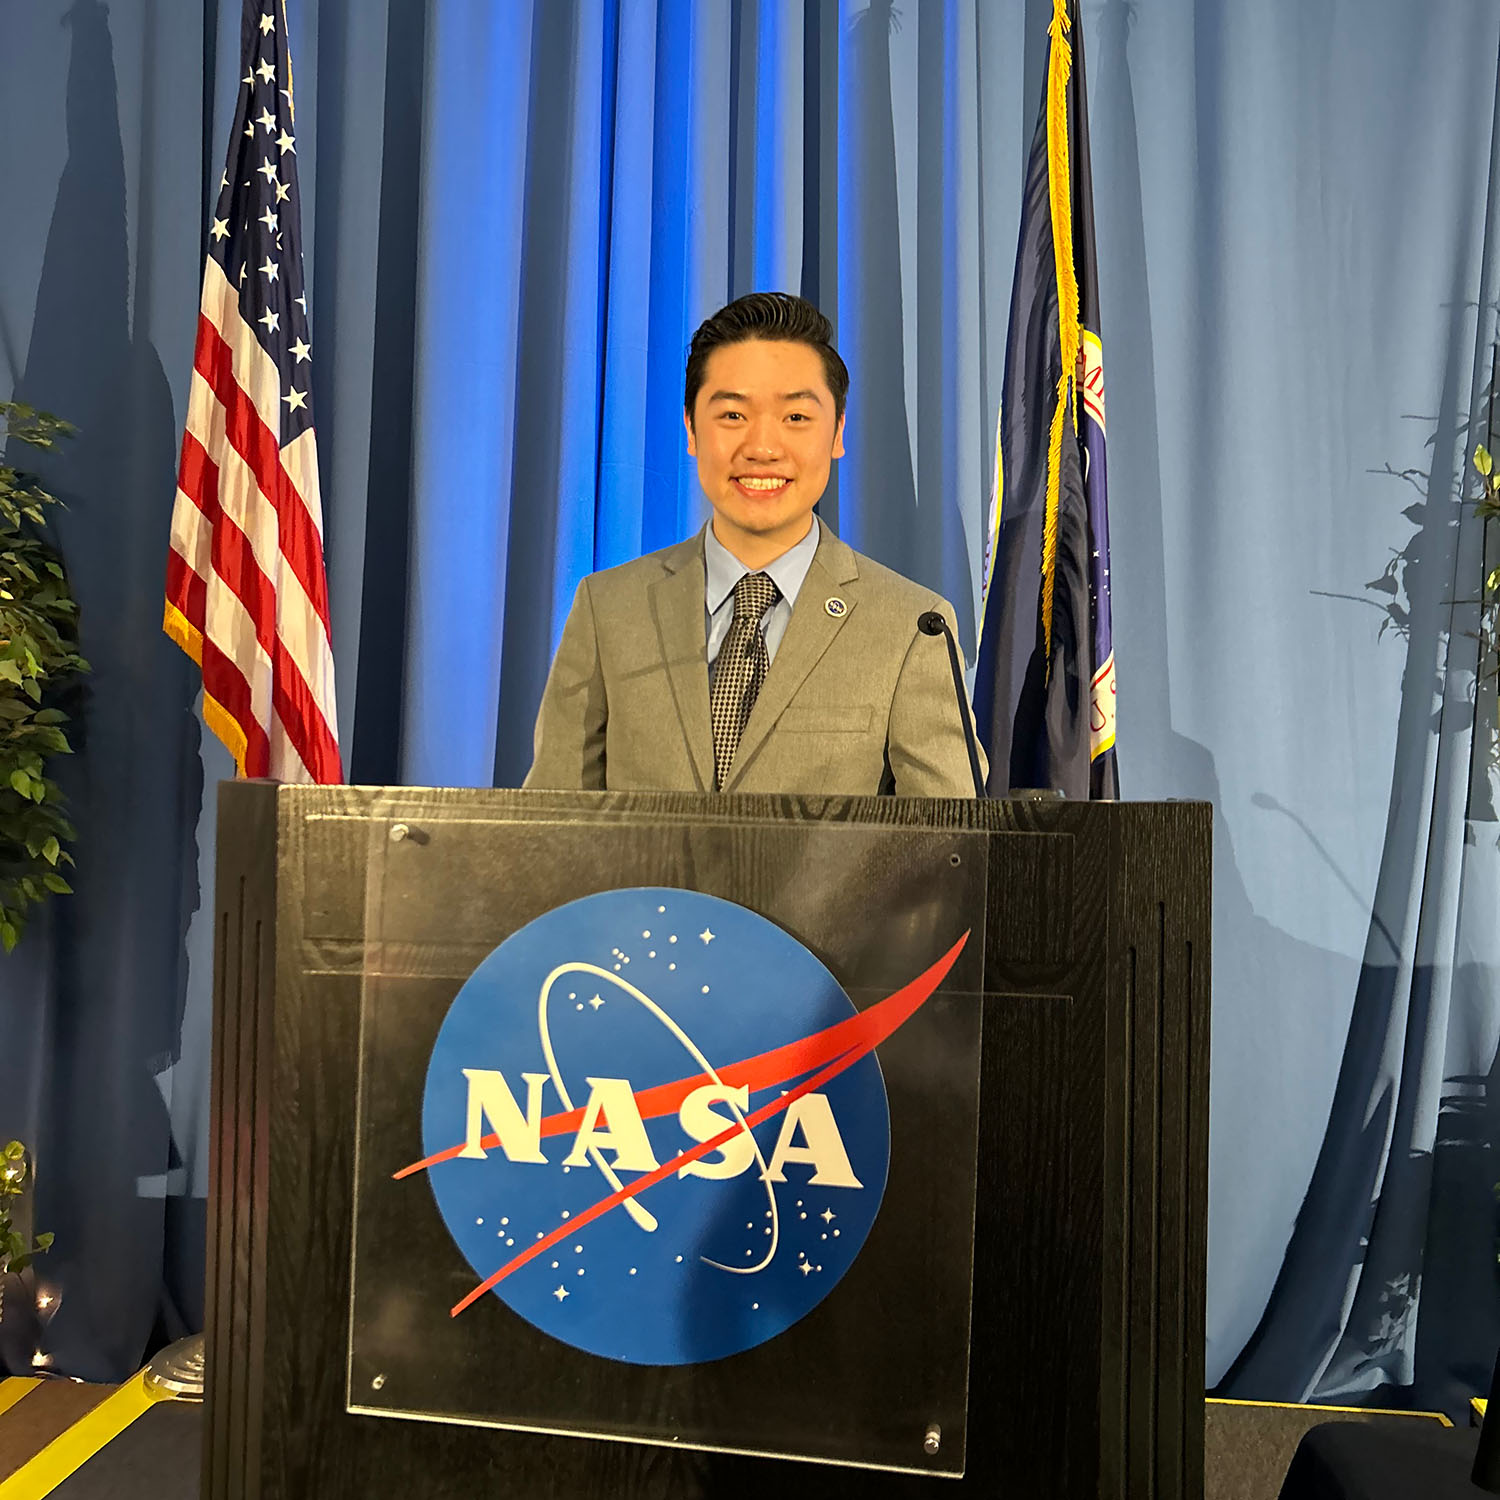 Photo: A picture of a man with black hair wearing a gray suit behind a podium that says "NASA"